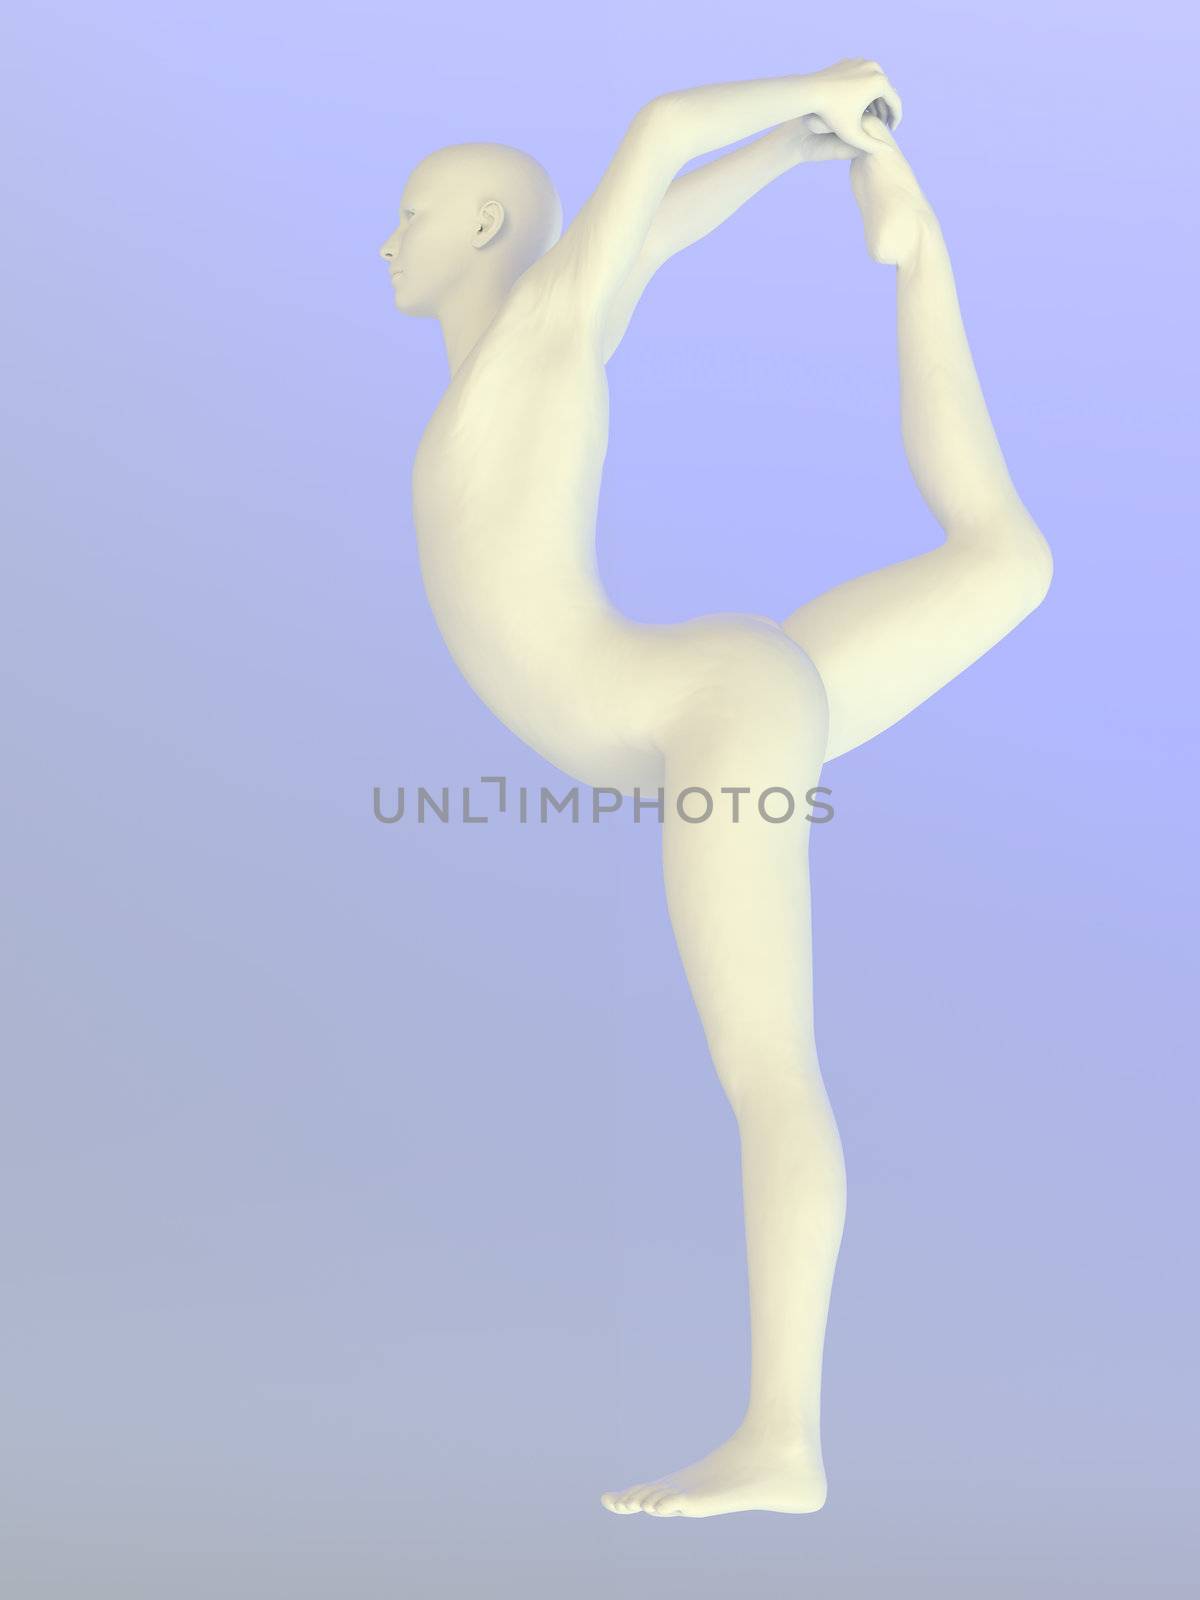 A digital illustration of an isolated yoga pose statue